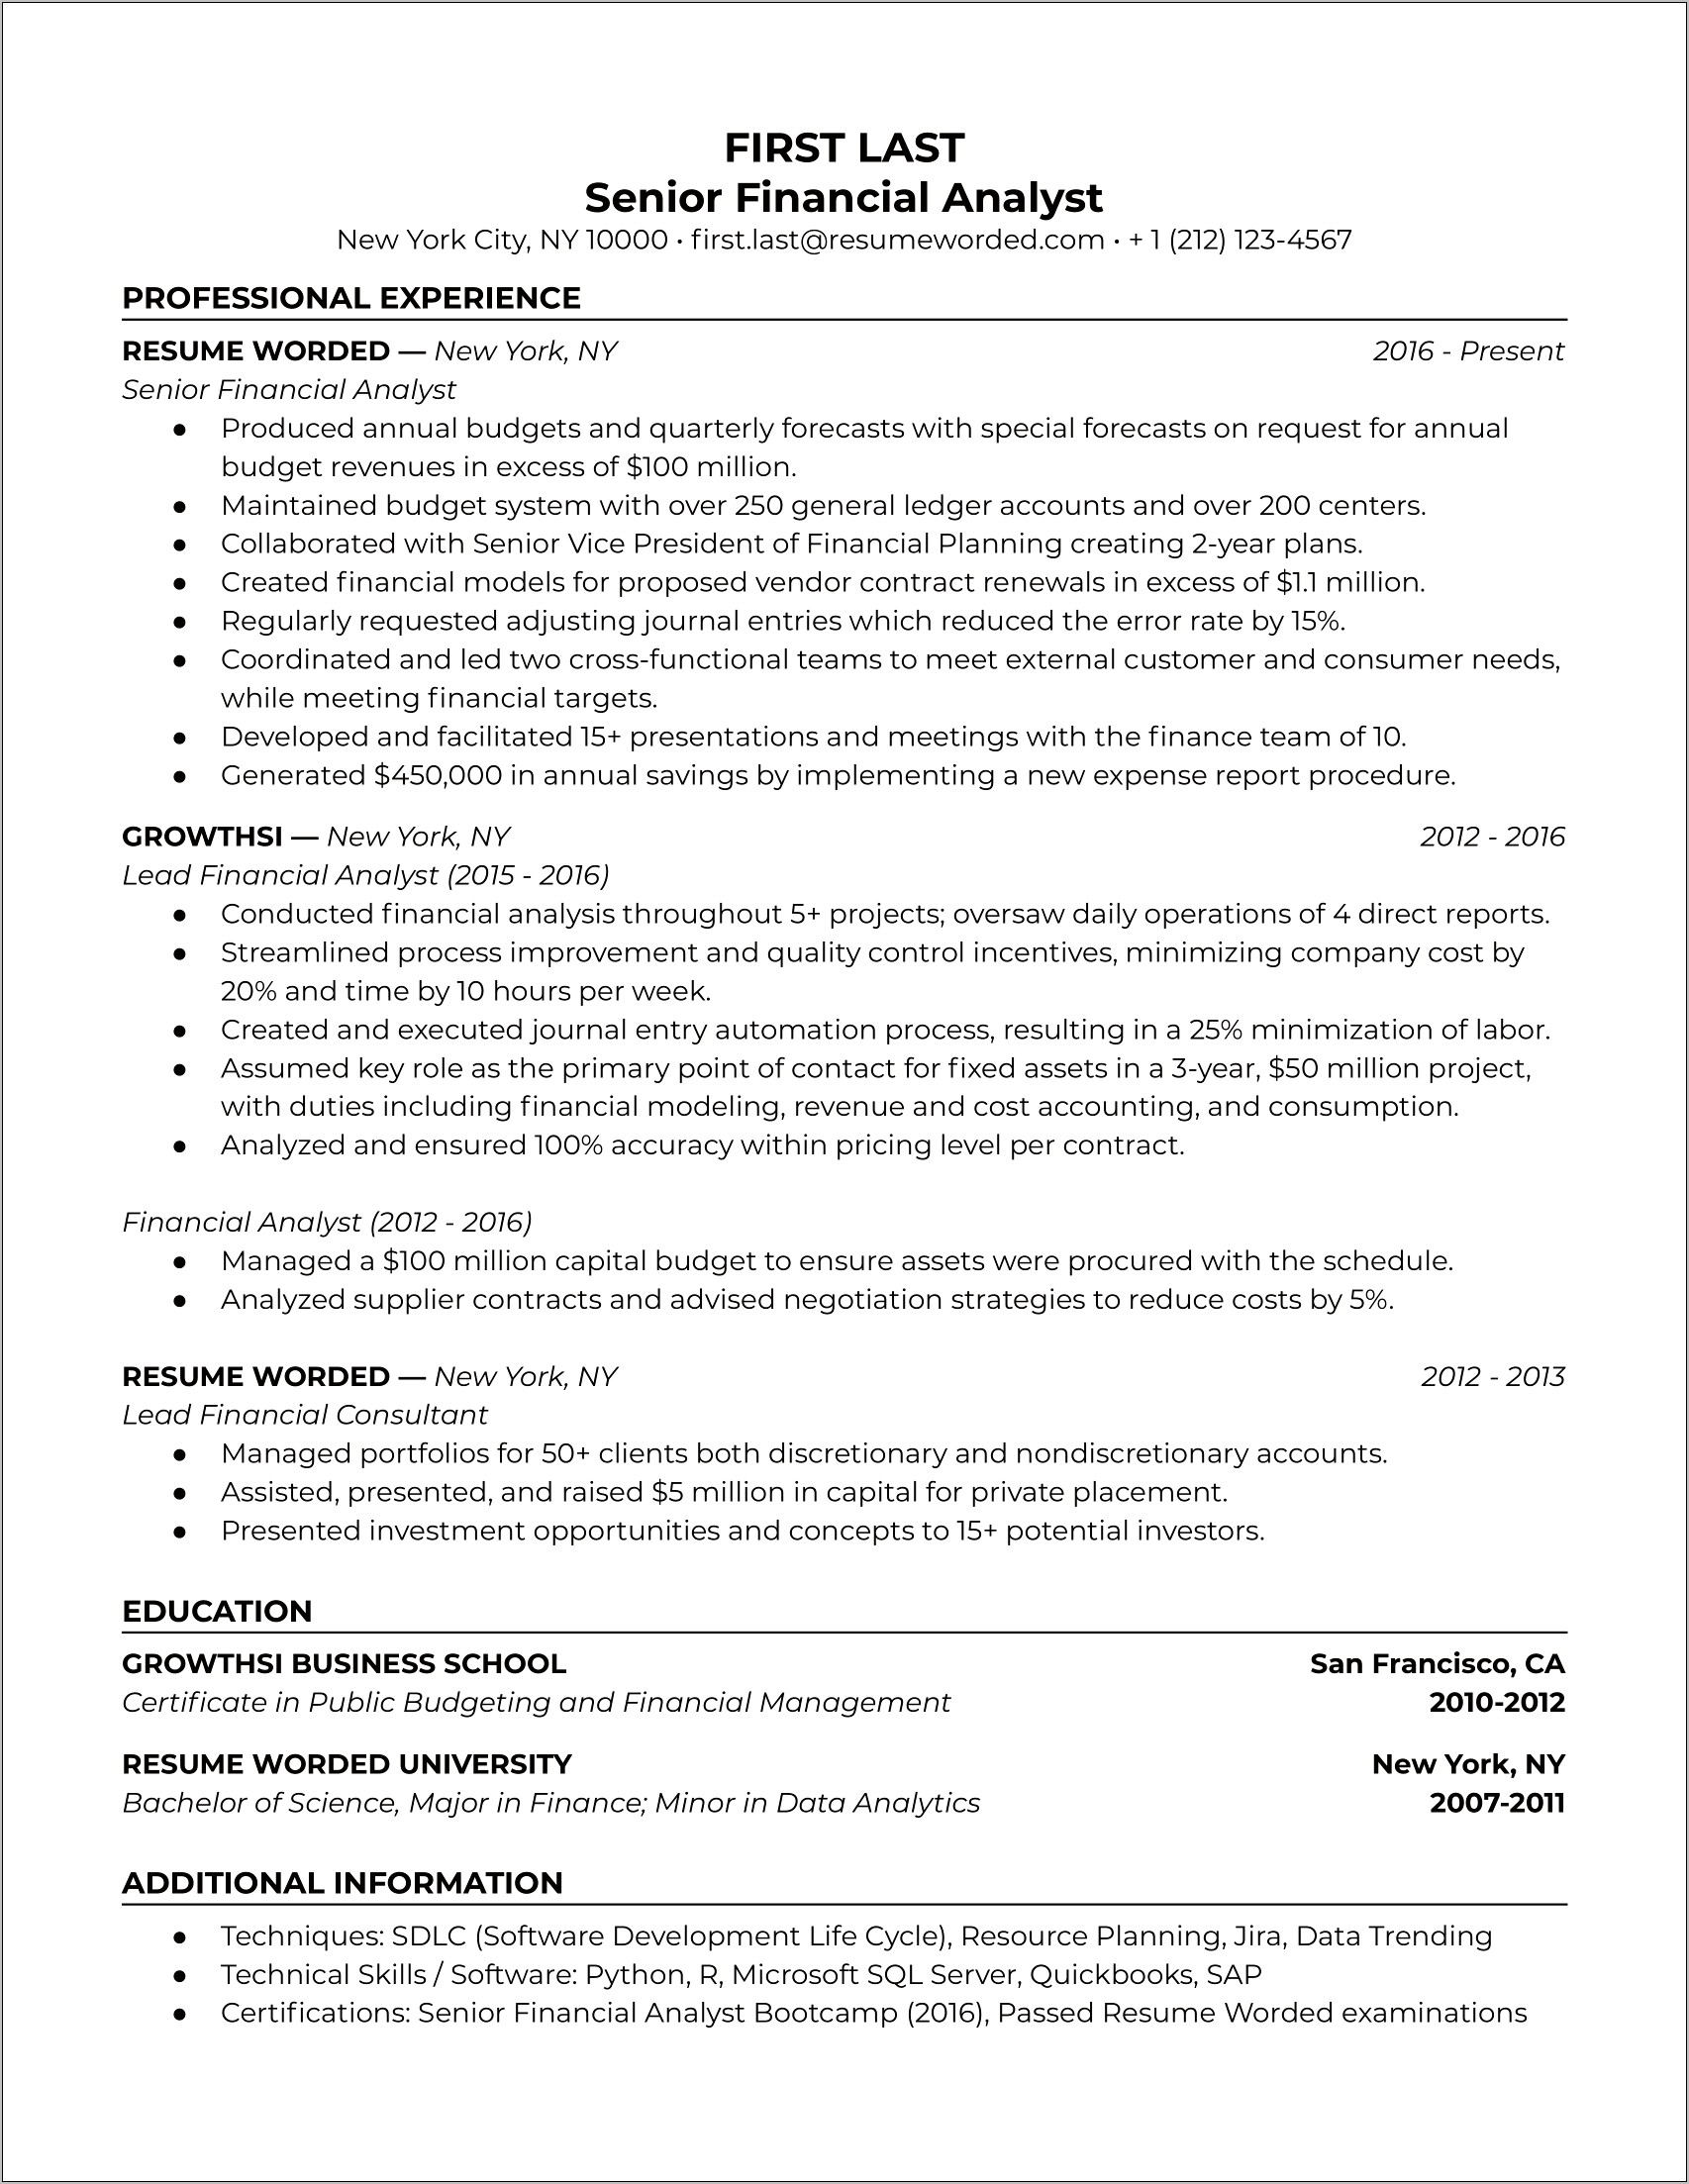 Resume Objectives Real Estate Analyst